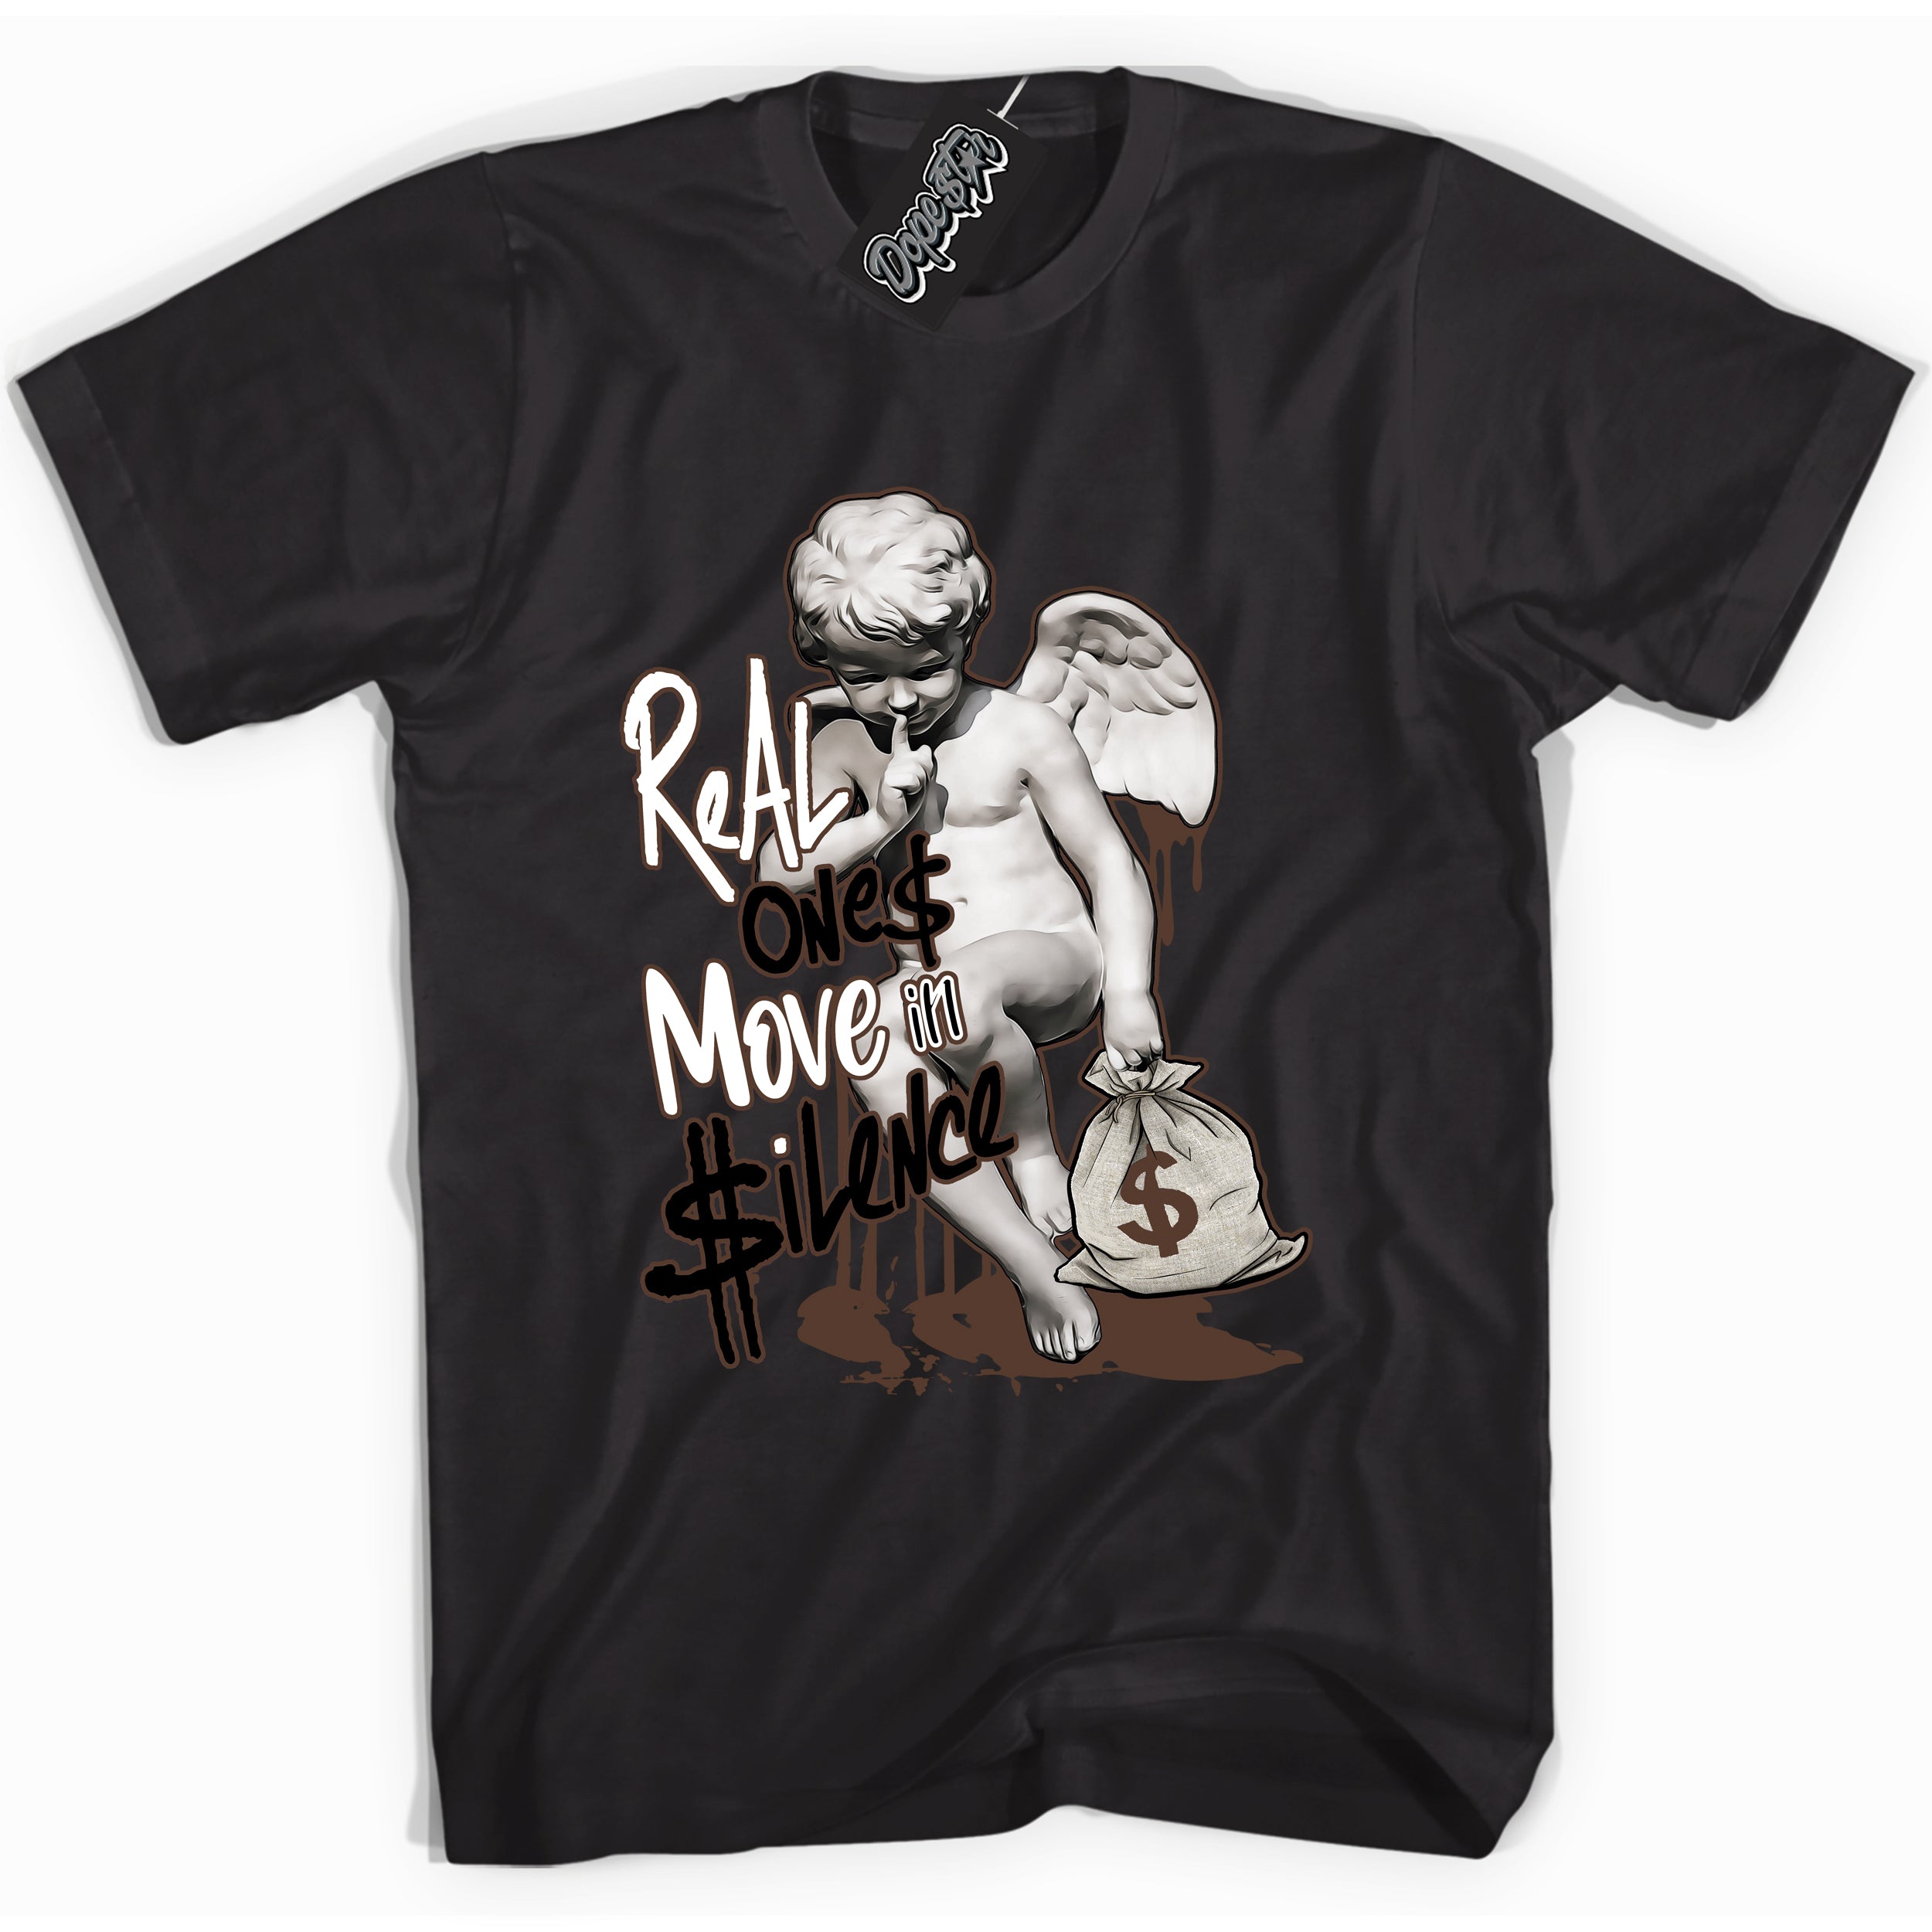 Cool Black graphic tee with “ Real Ones Cherub ” design, that perfectly matches Palomino 1s sneakers 